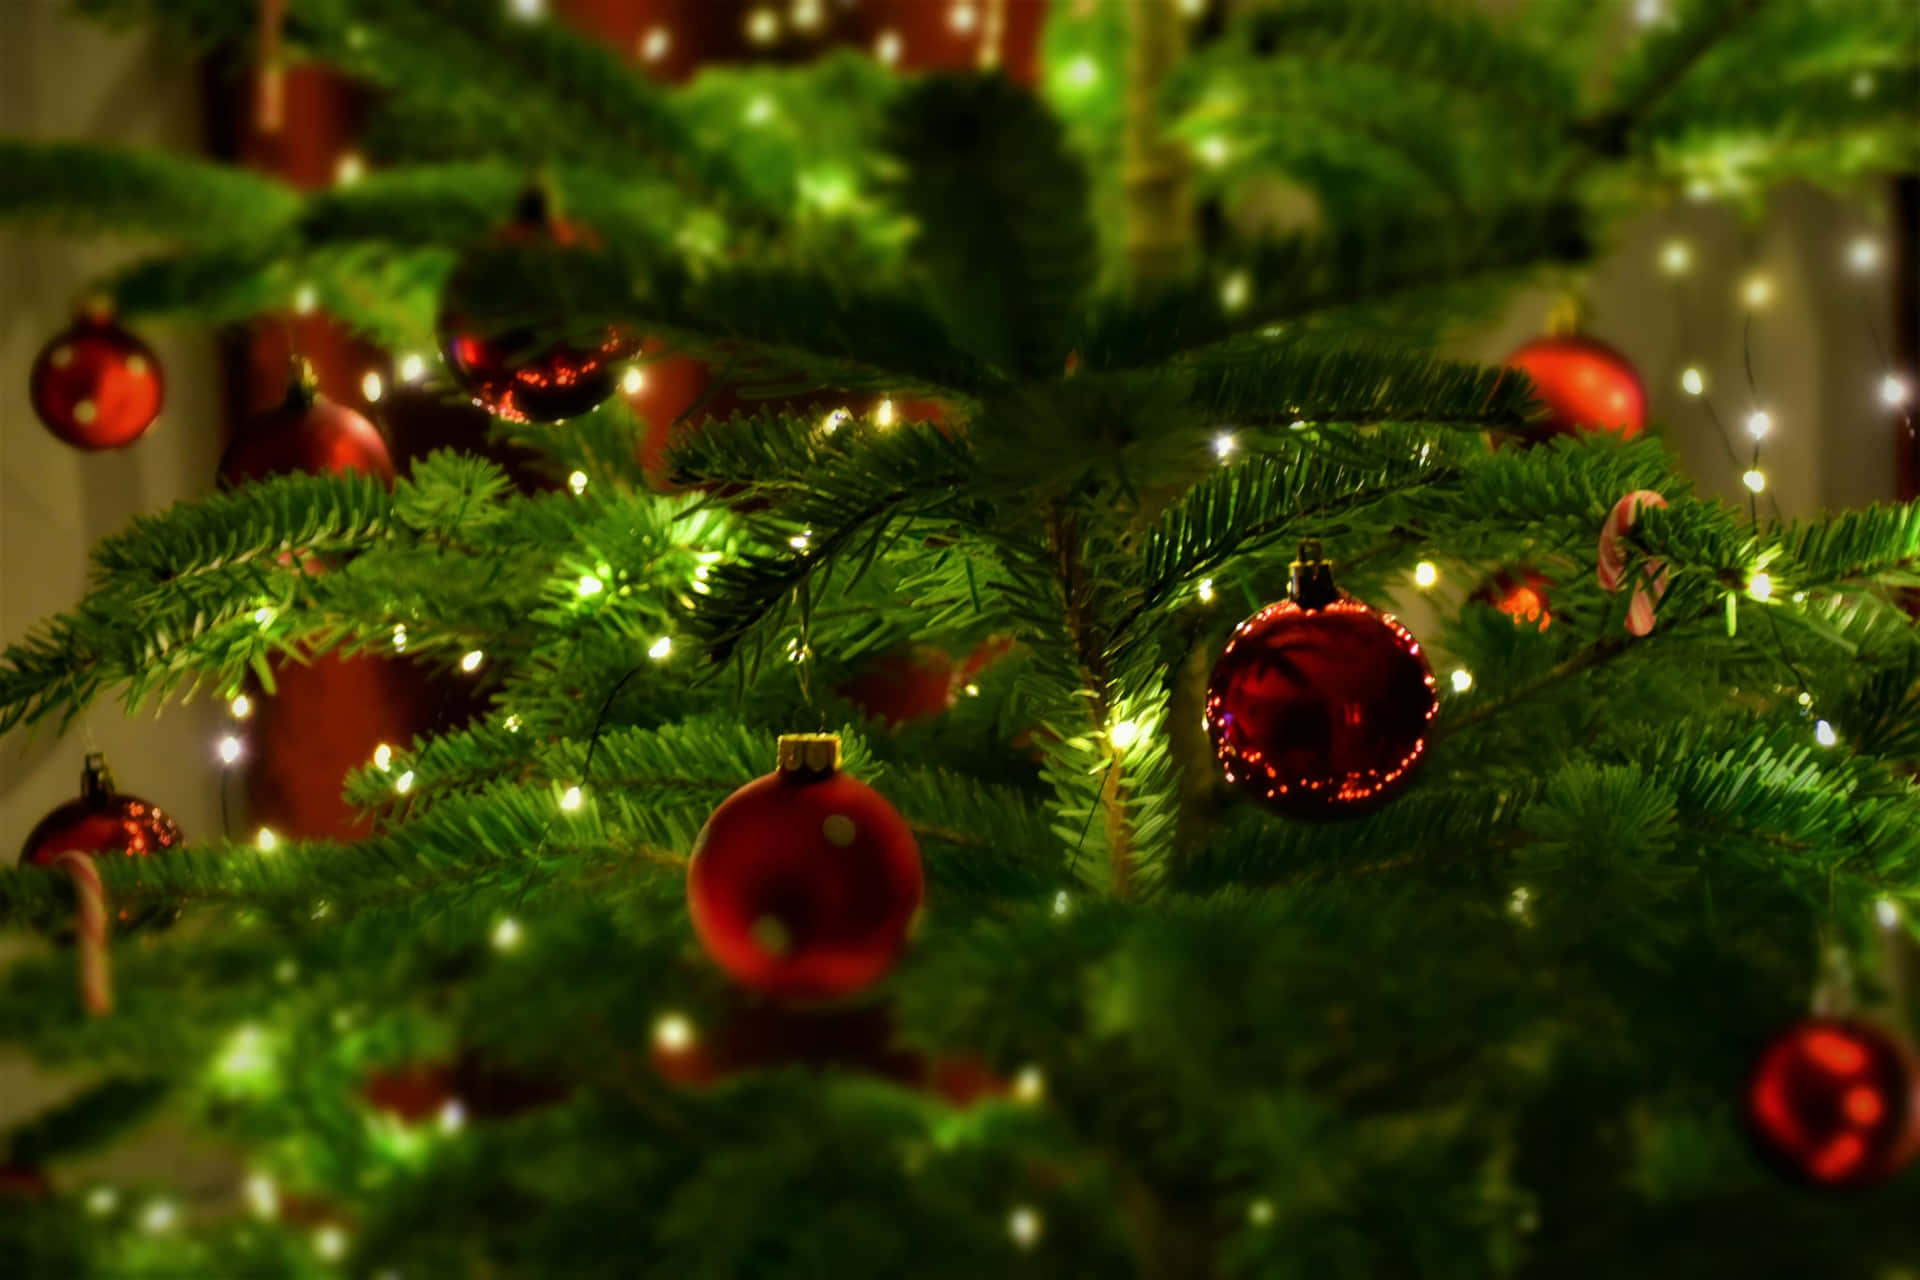 Engage your customers with Christmas cheer using a festive Virtual Background this holiday season!